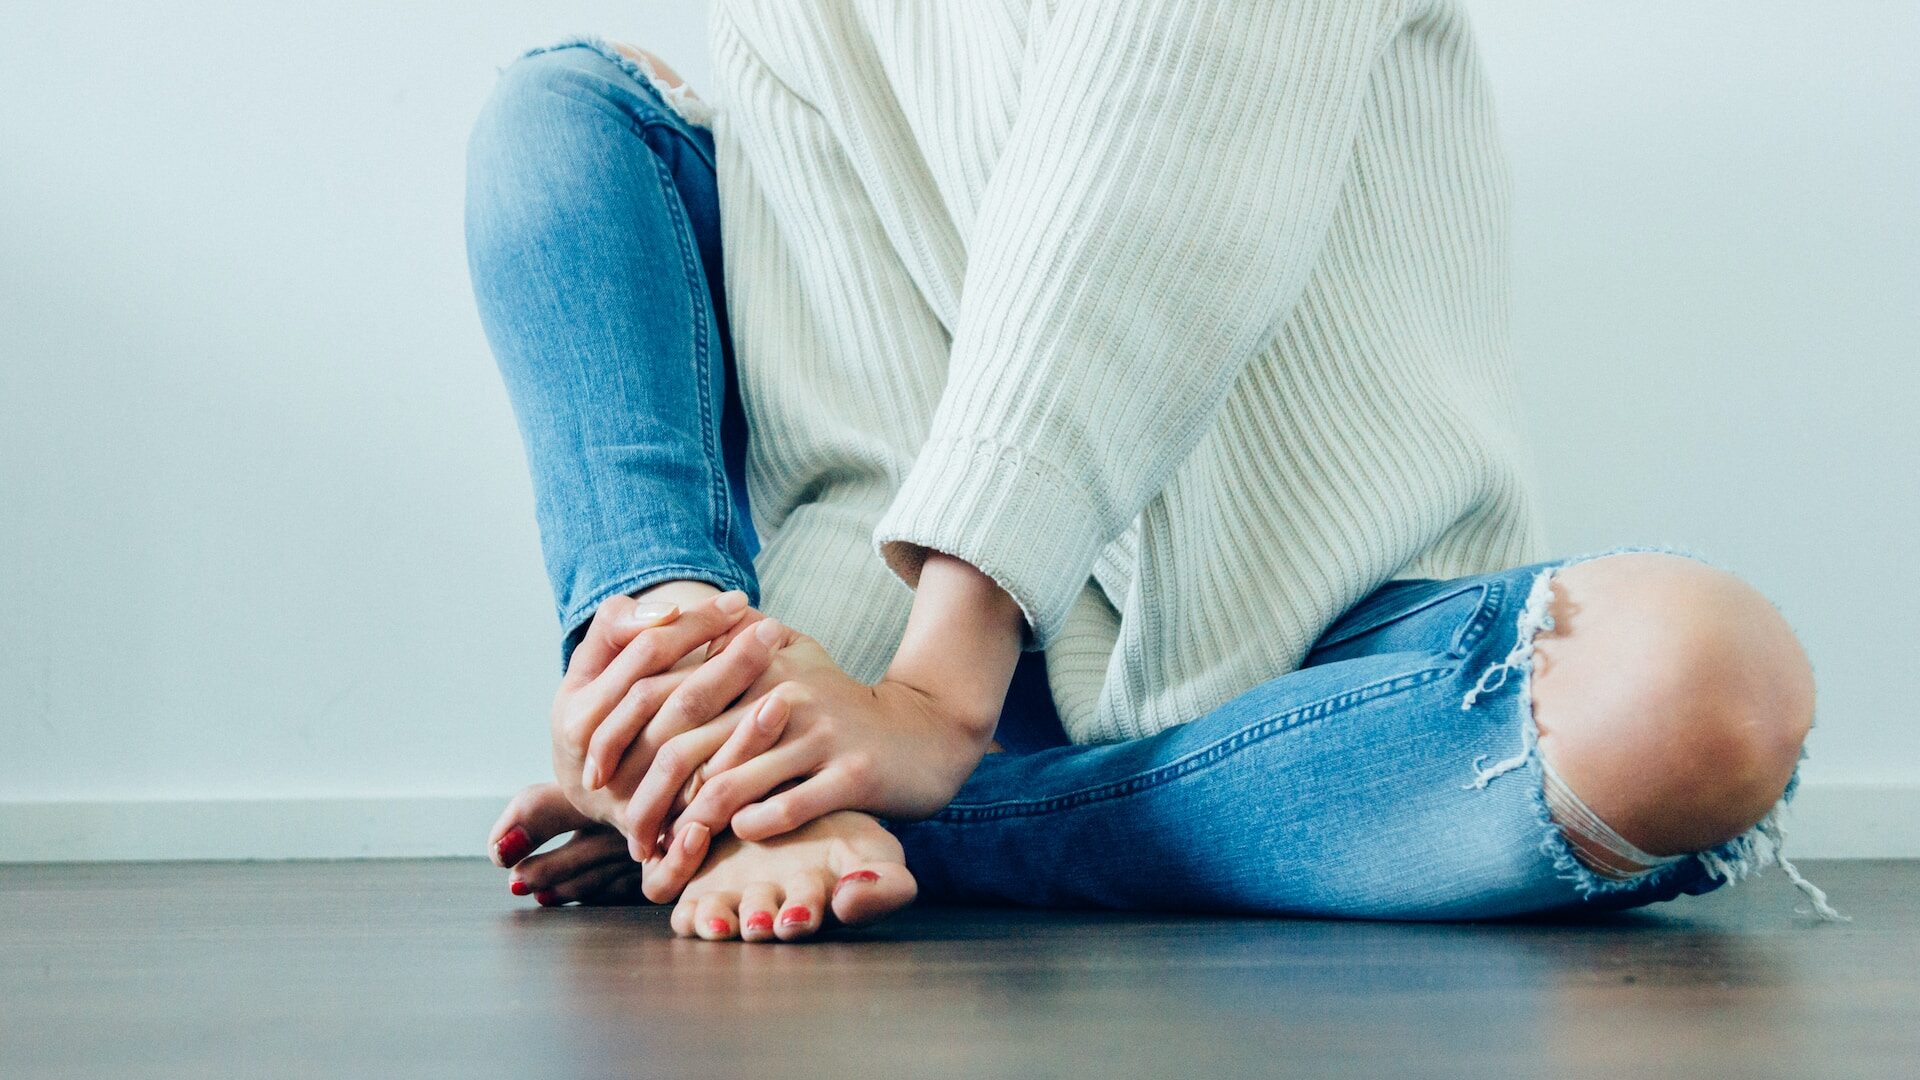 Leg Cramps: Diseases, Causes, Treatment, and Prevention